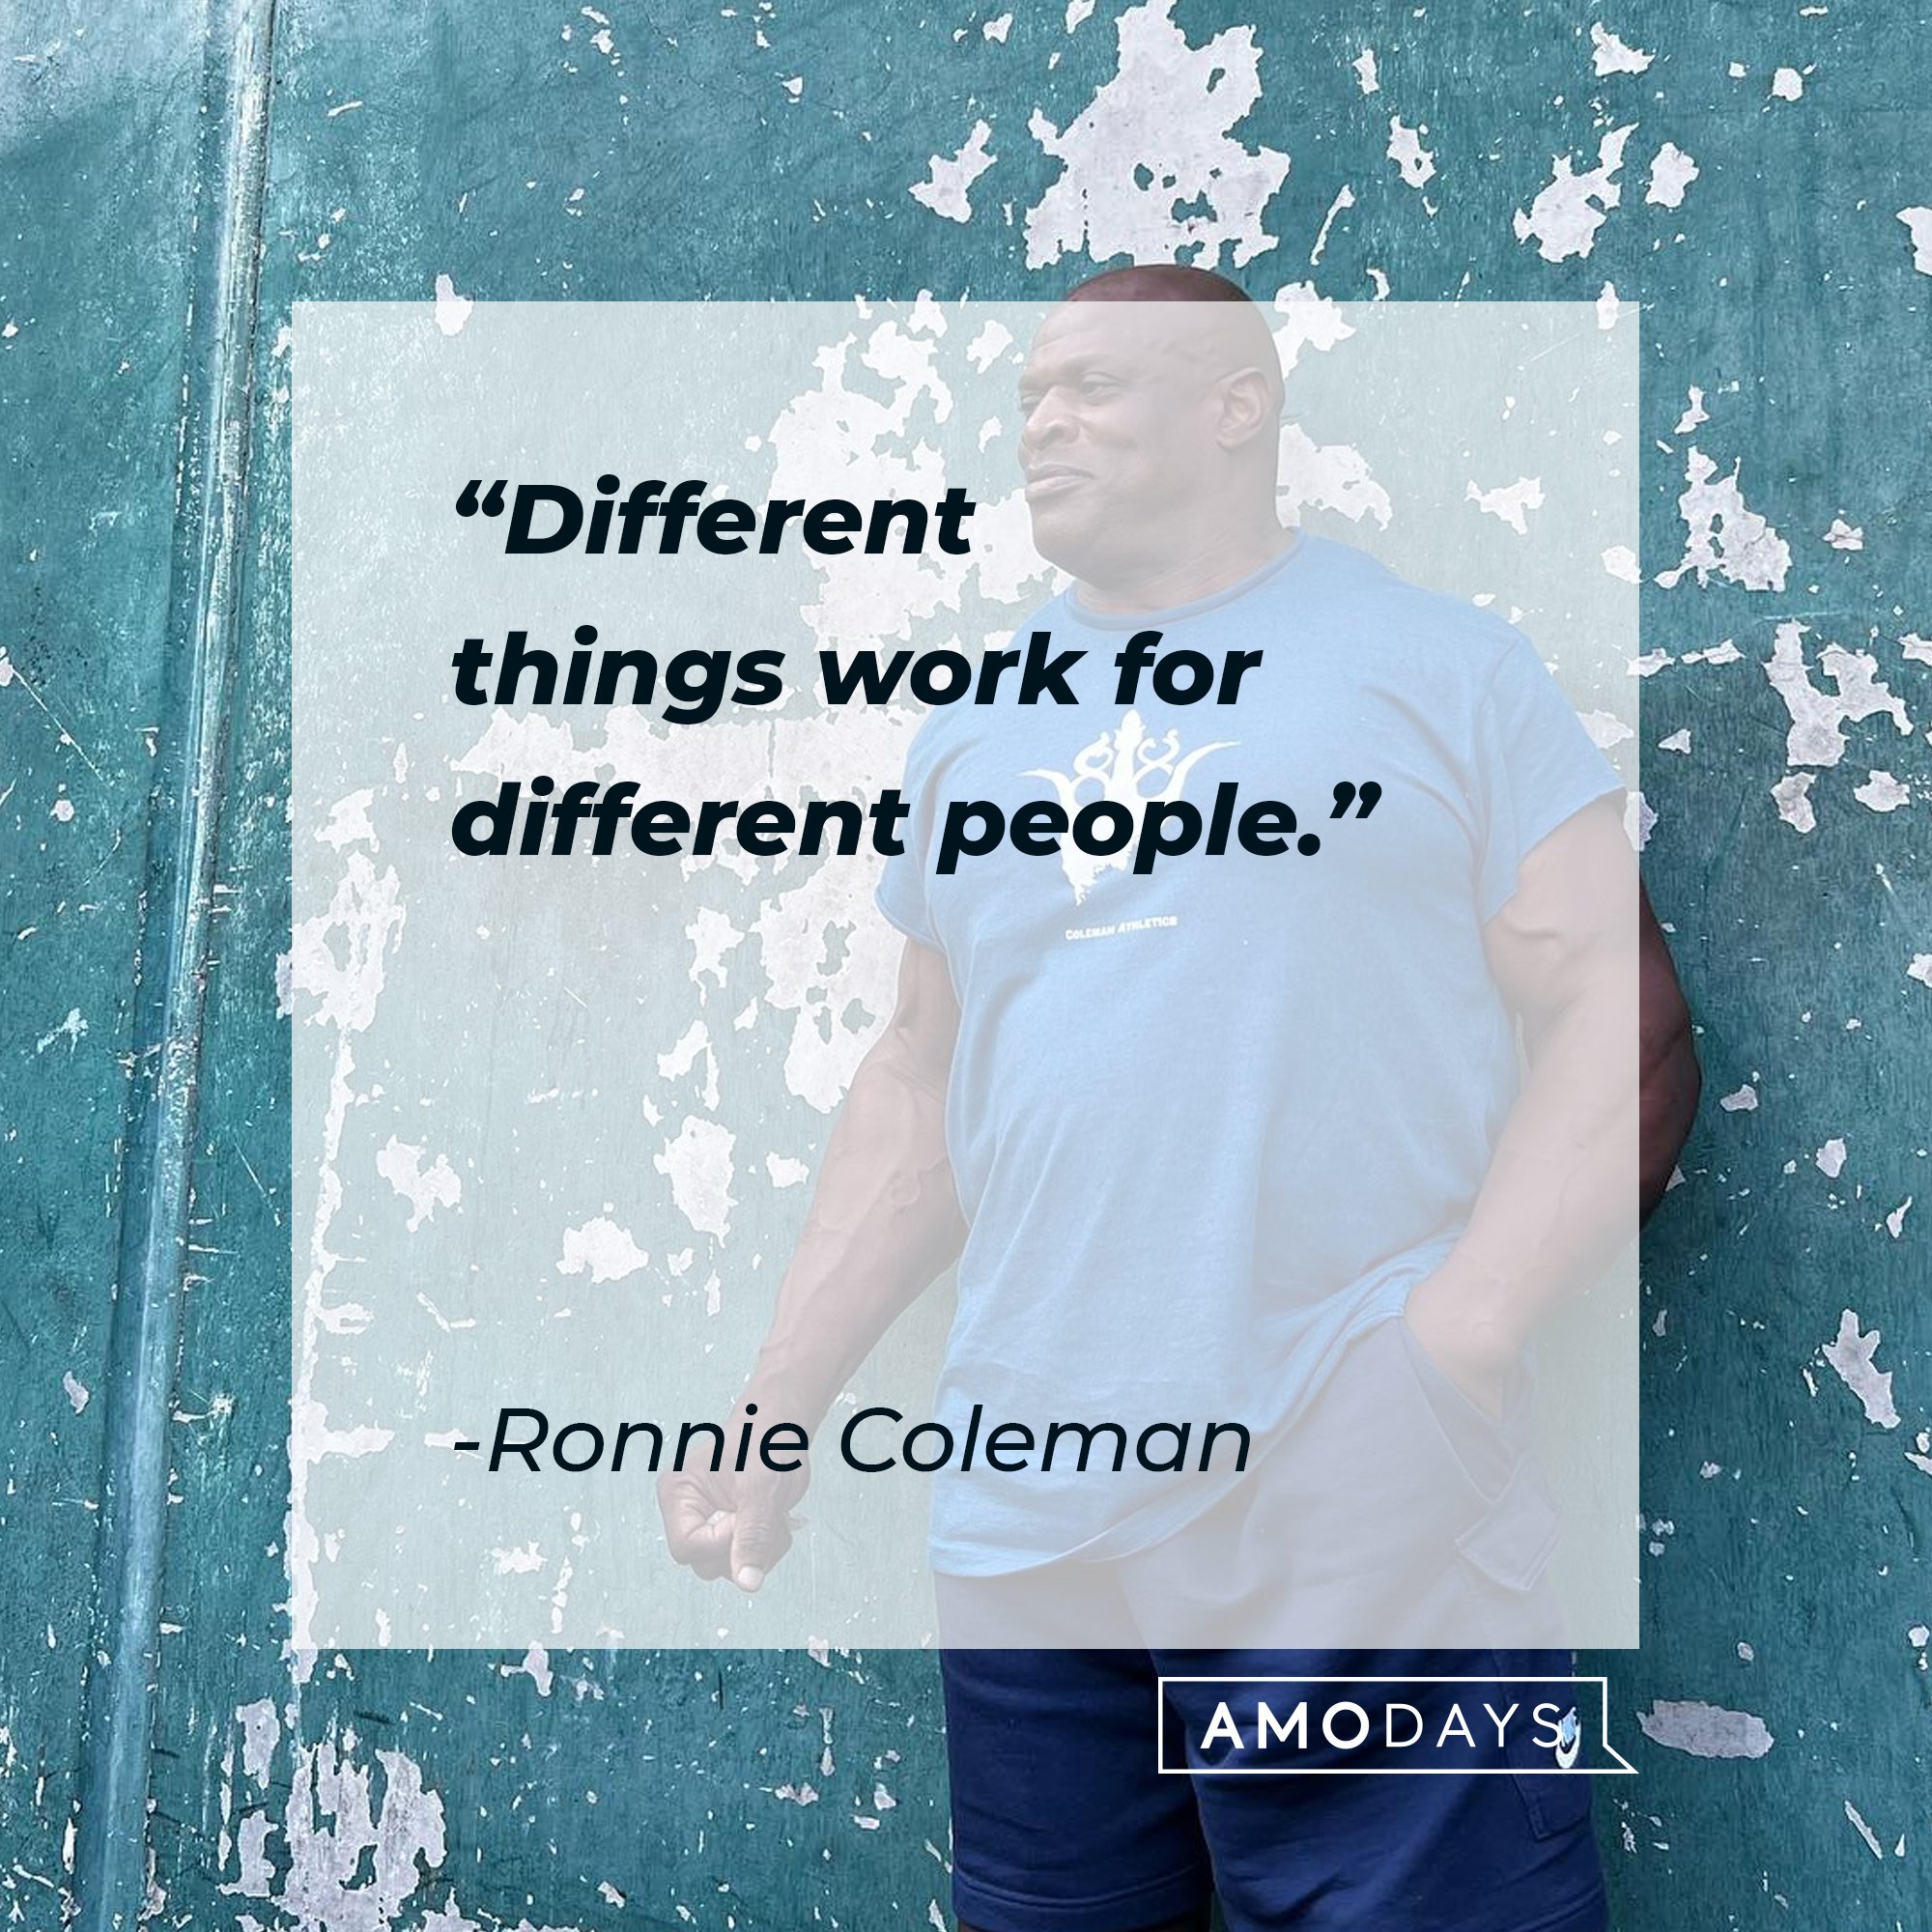 Ronnie Coleman’s quote: "Different things work for different people." | Image: AmoDays